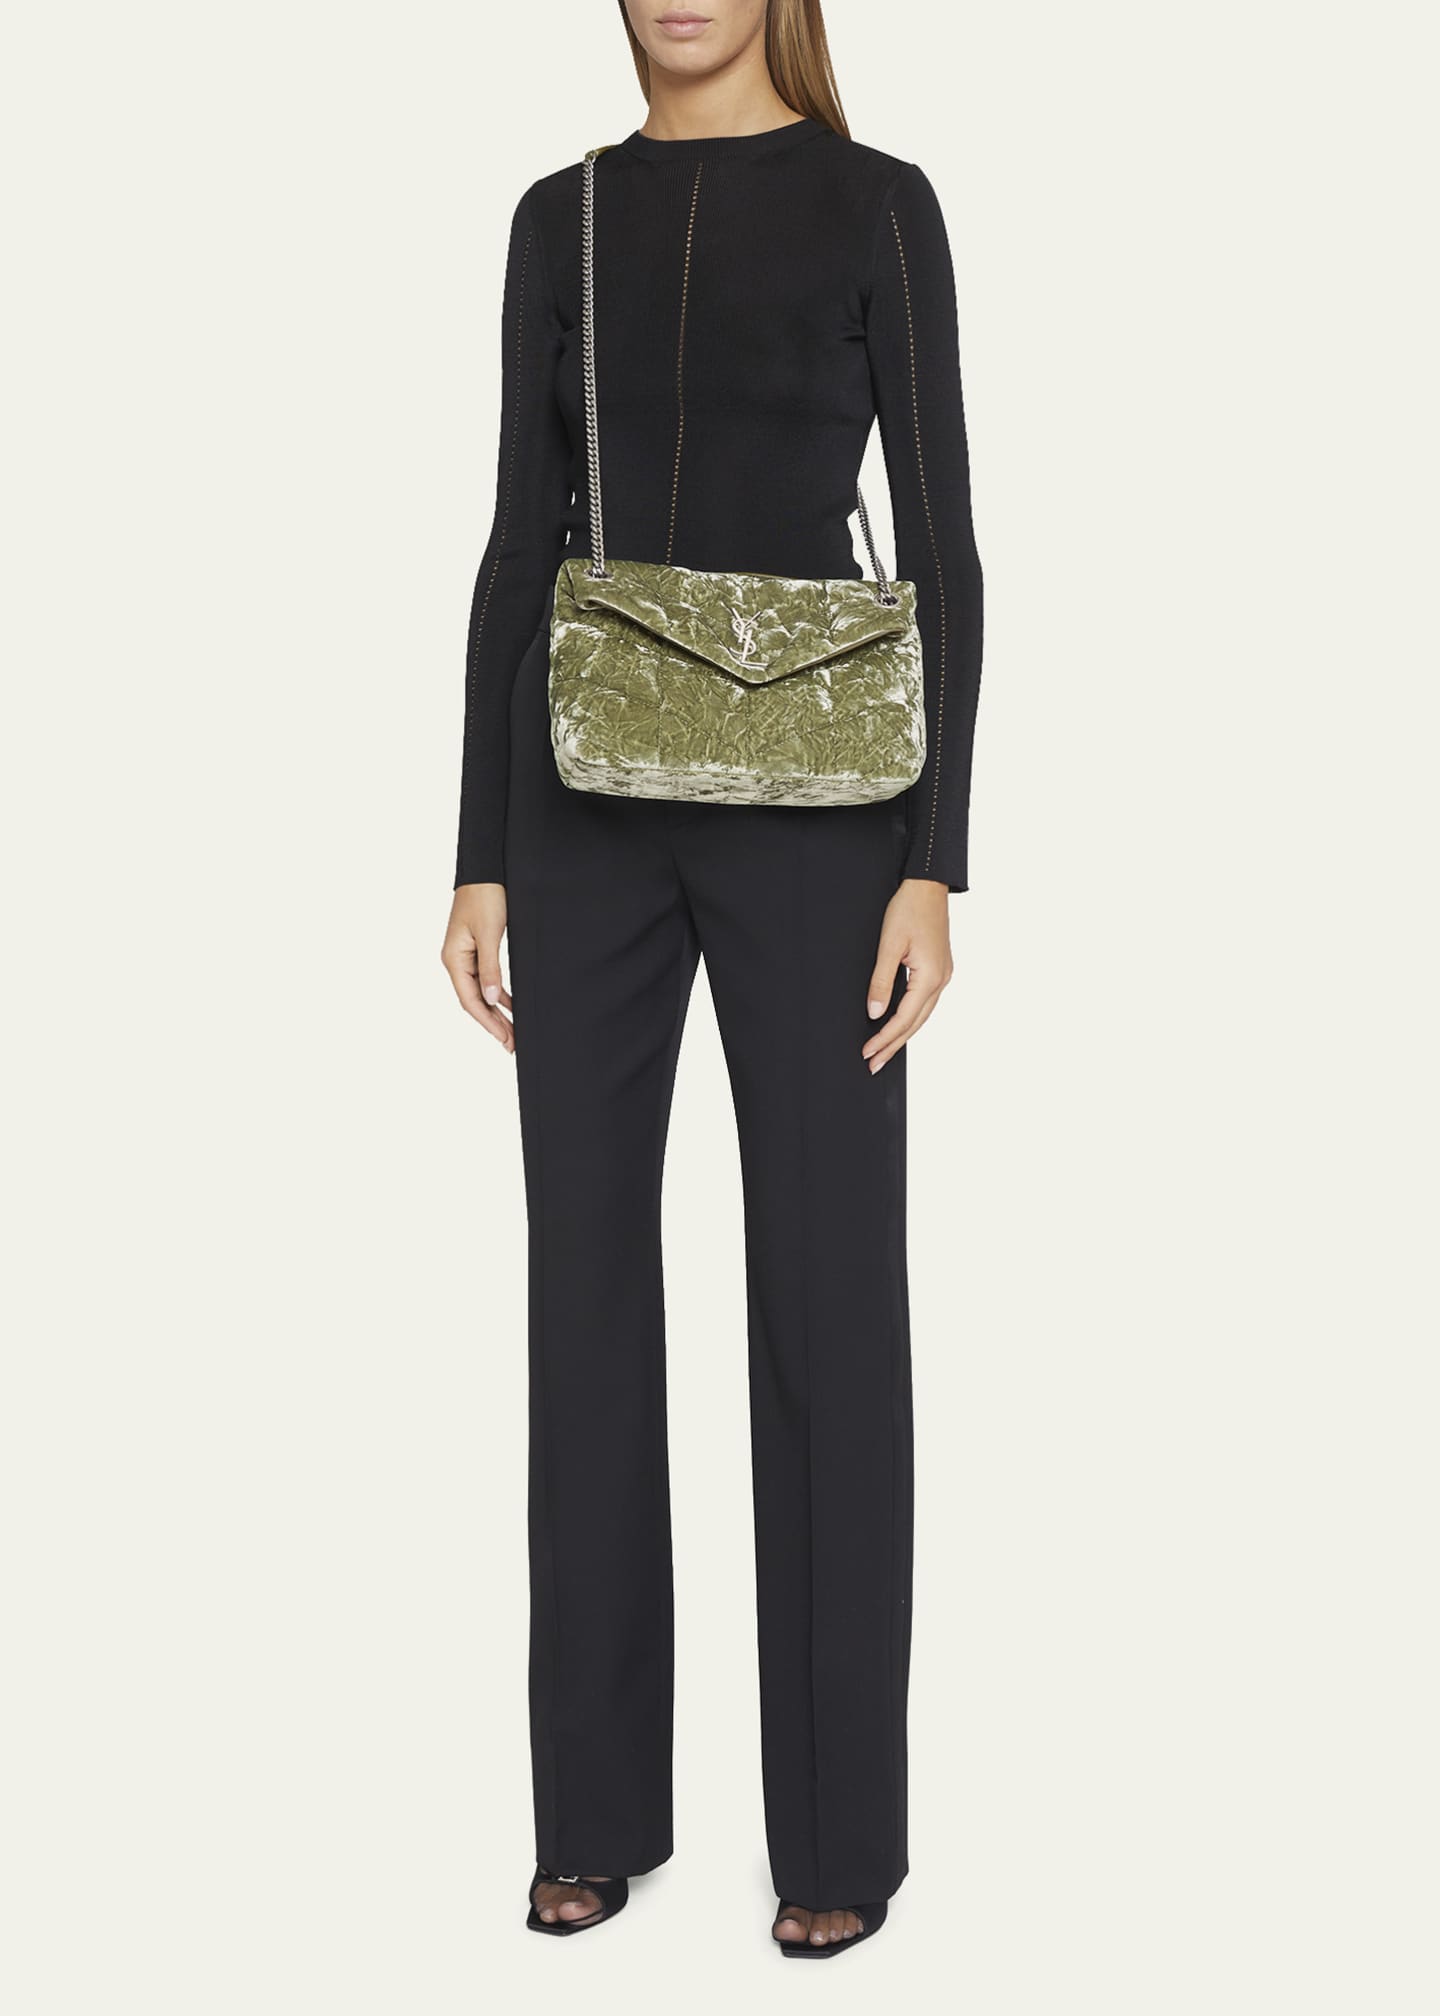 August Pfüller Women - Perfect companion for upcoming season: the @ysl  Loulou Puffer Bag in olive green // € 2190